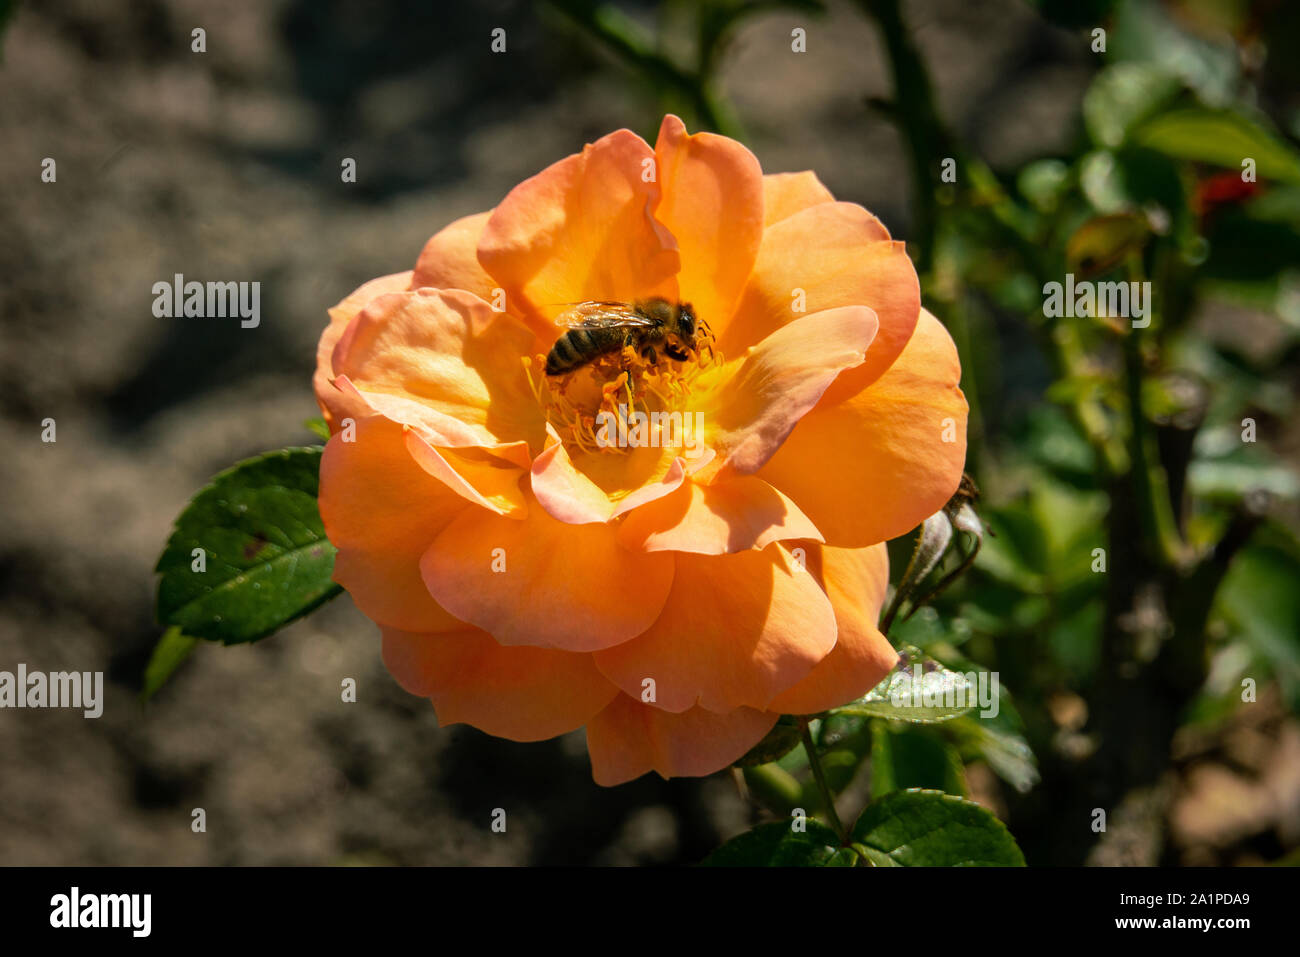 Jolly Bee High Resolution Stock Photography and Images - Alamy